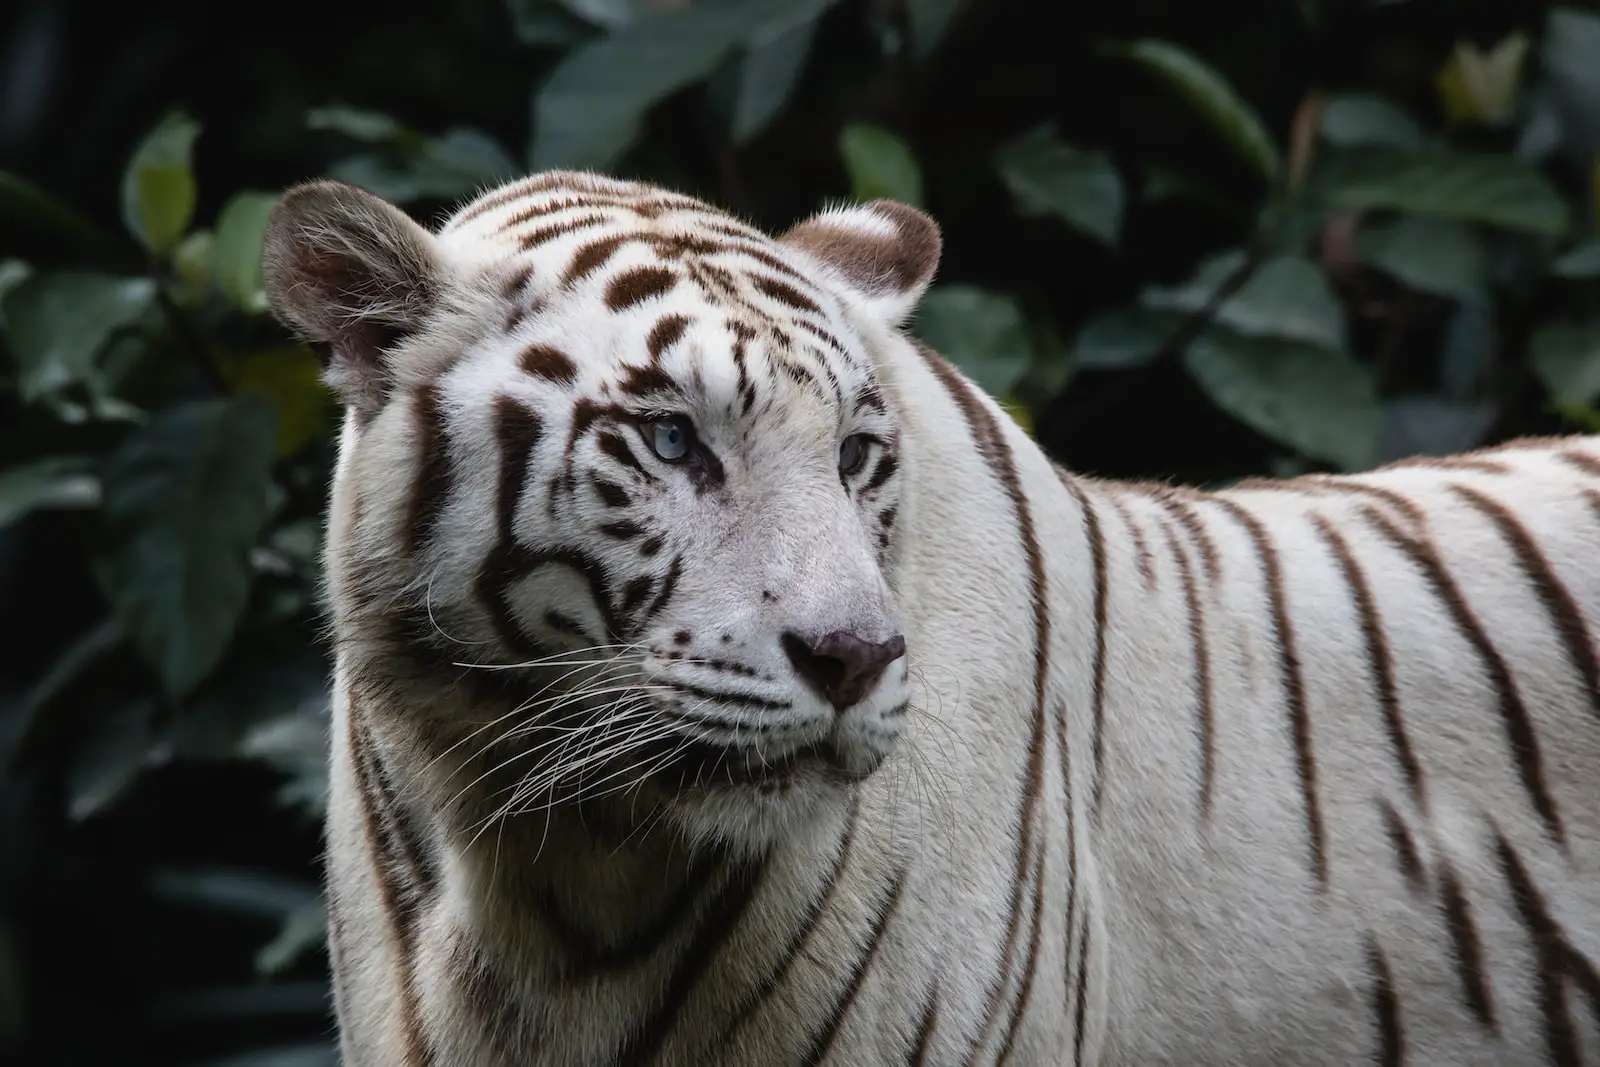 white and black tiger in close up photography